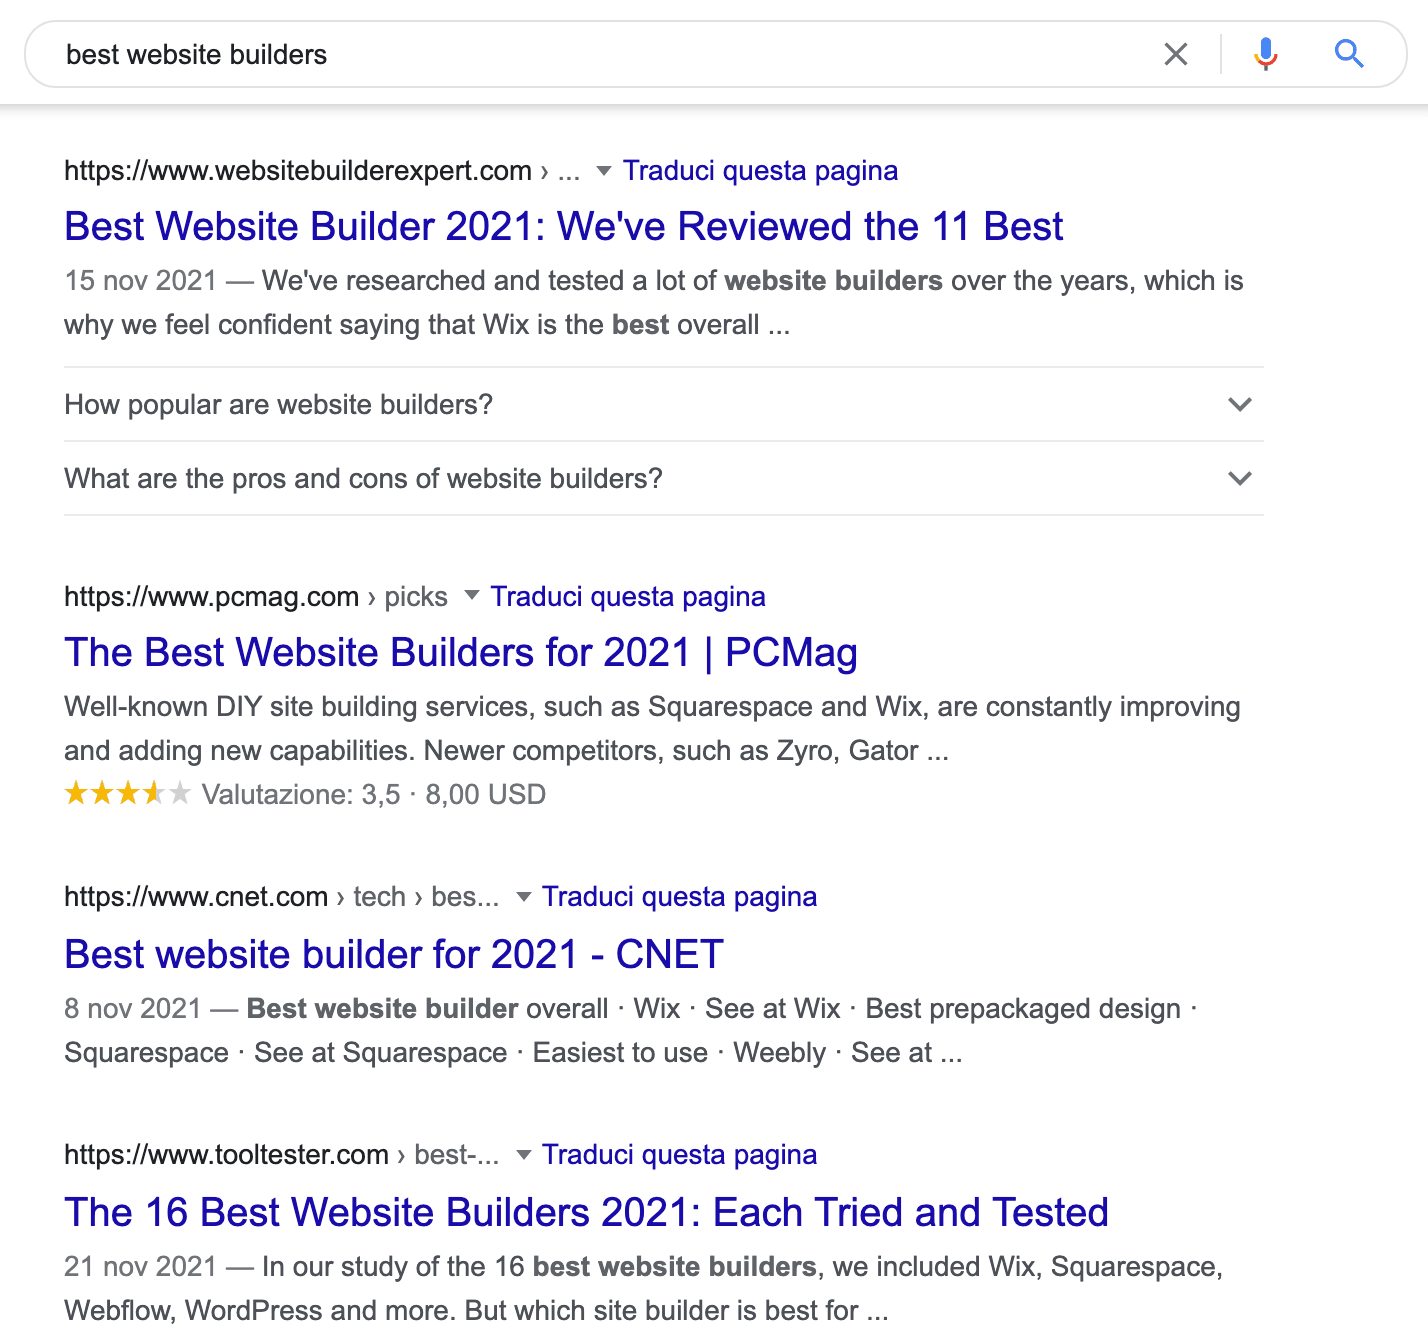 Search results for "best website builders"